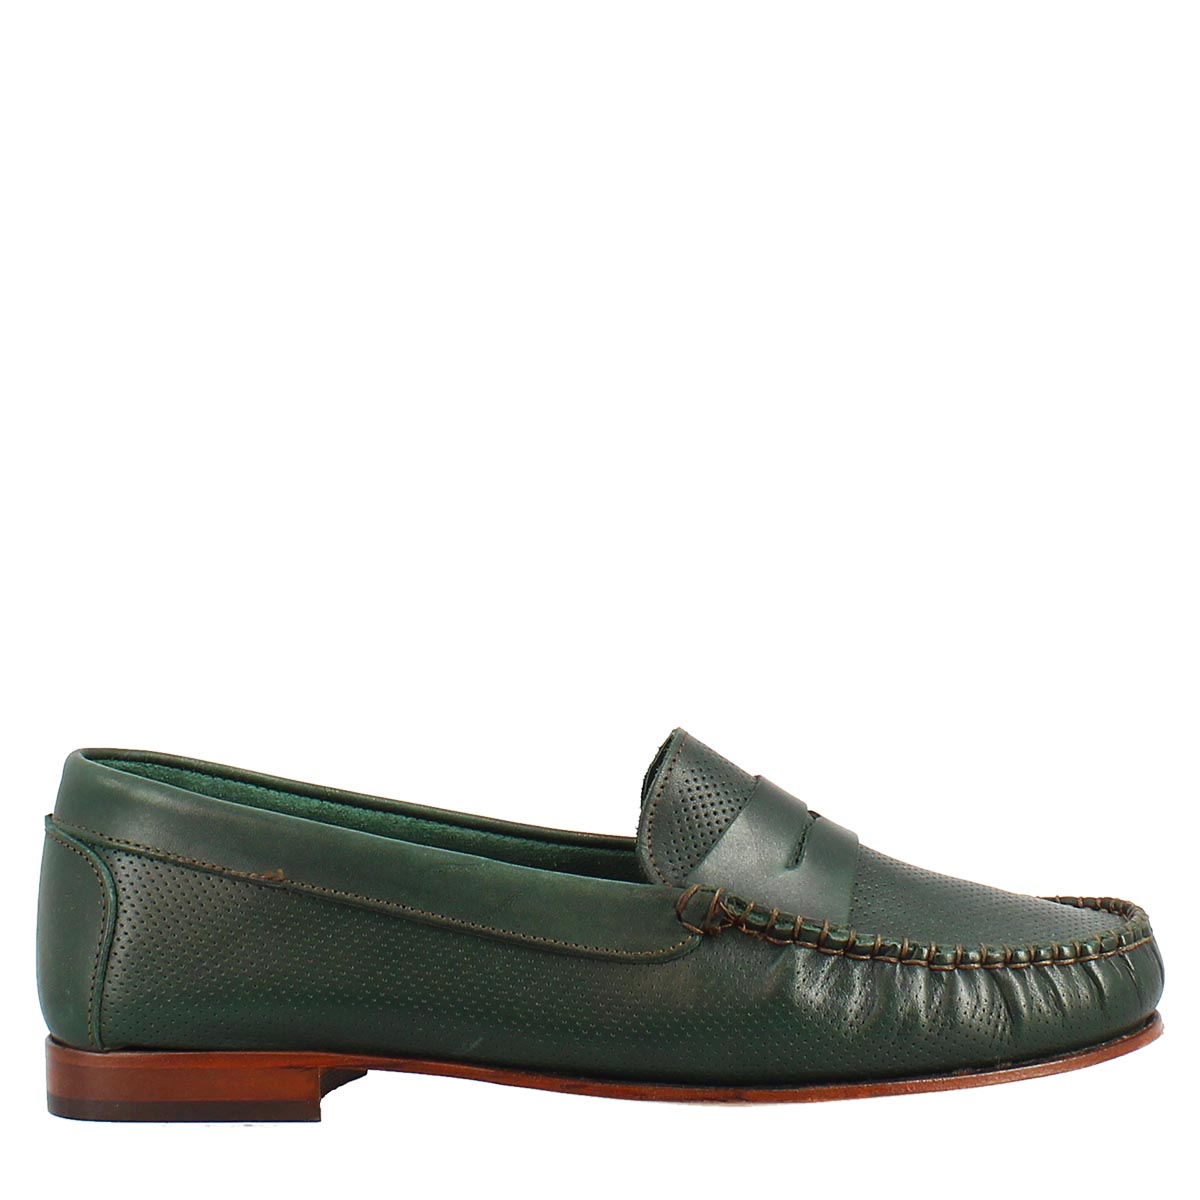 Handmade college loafers for women in green perforated leather